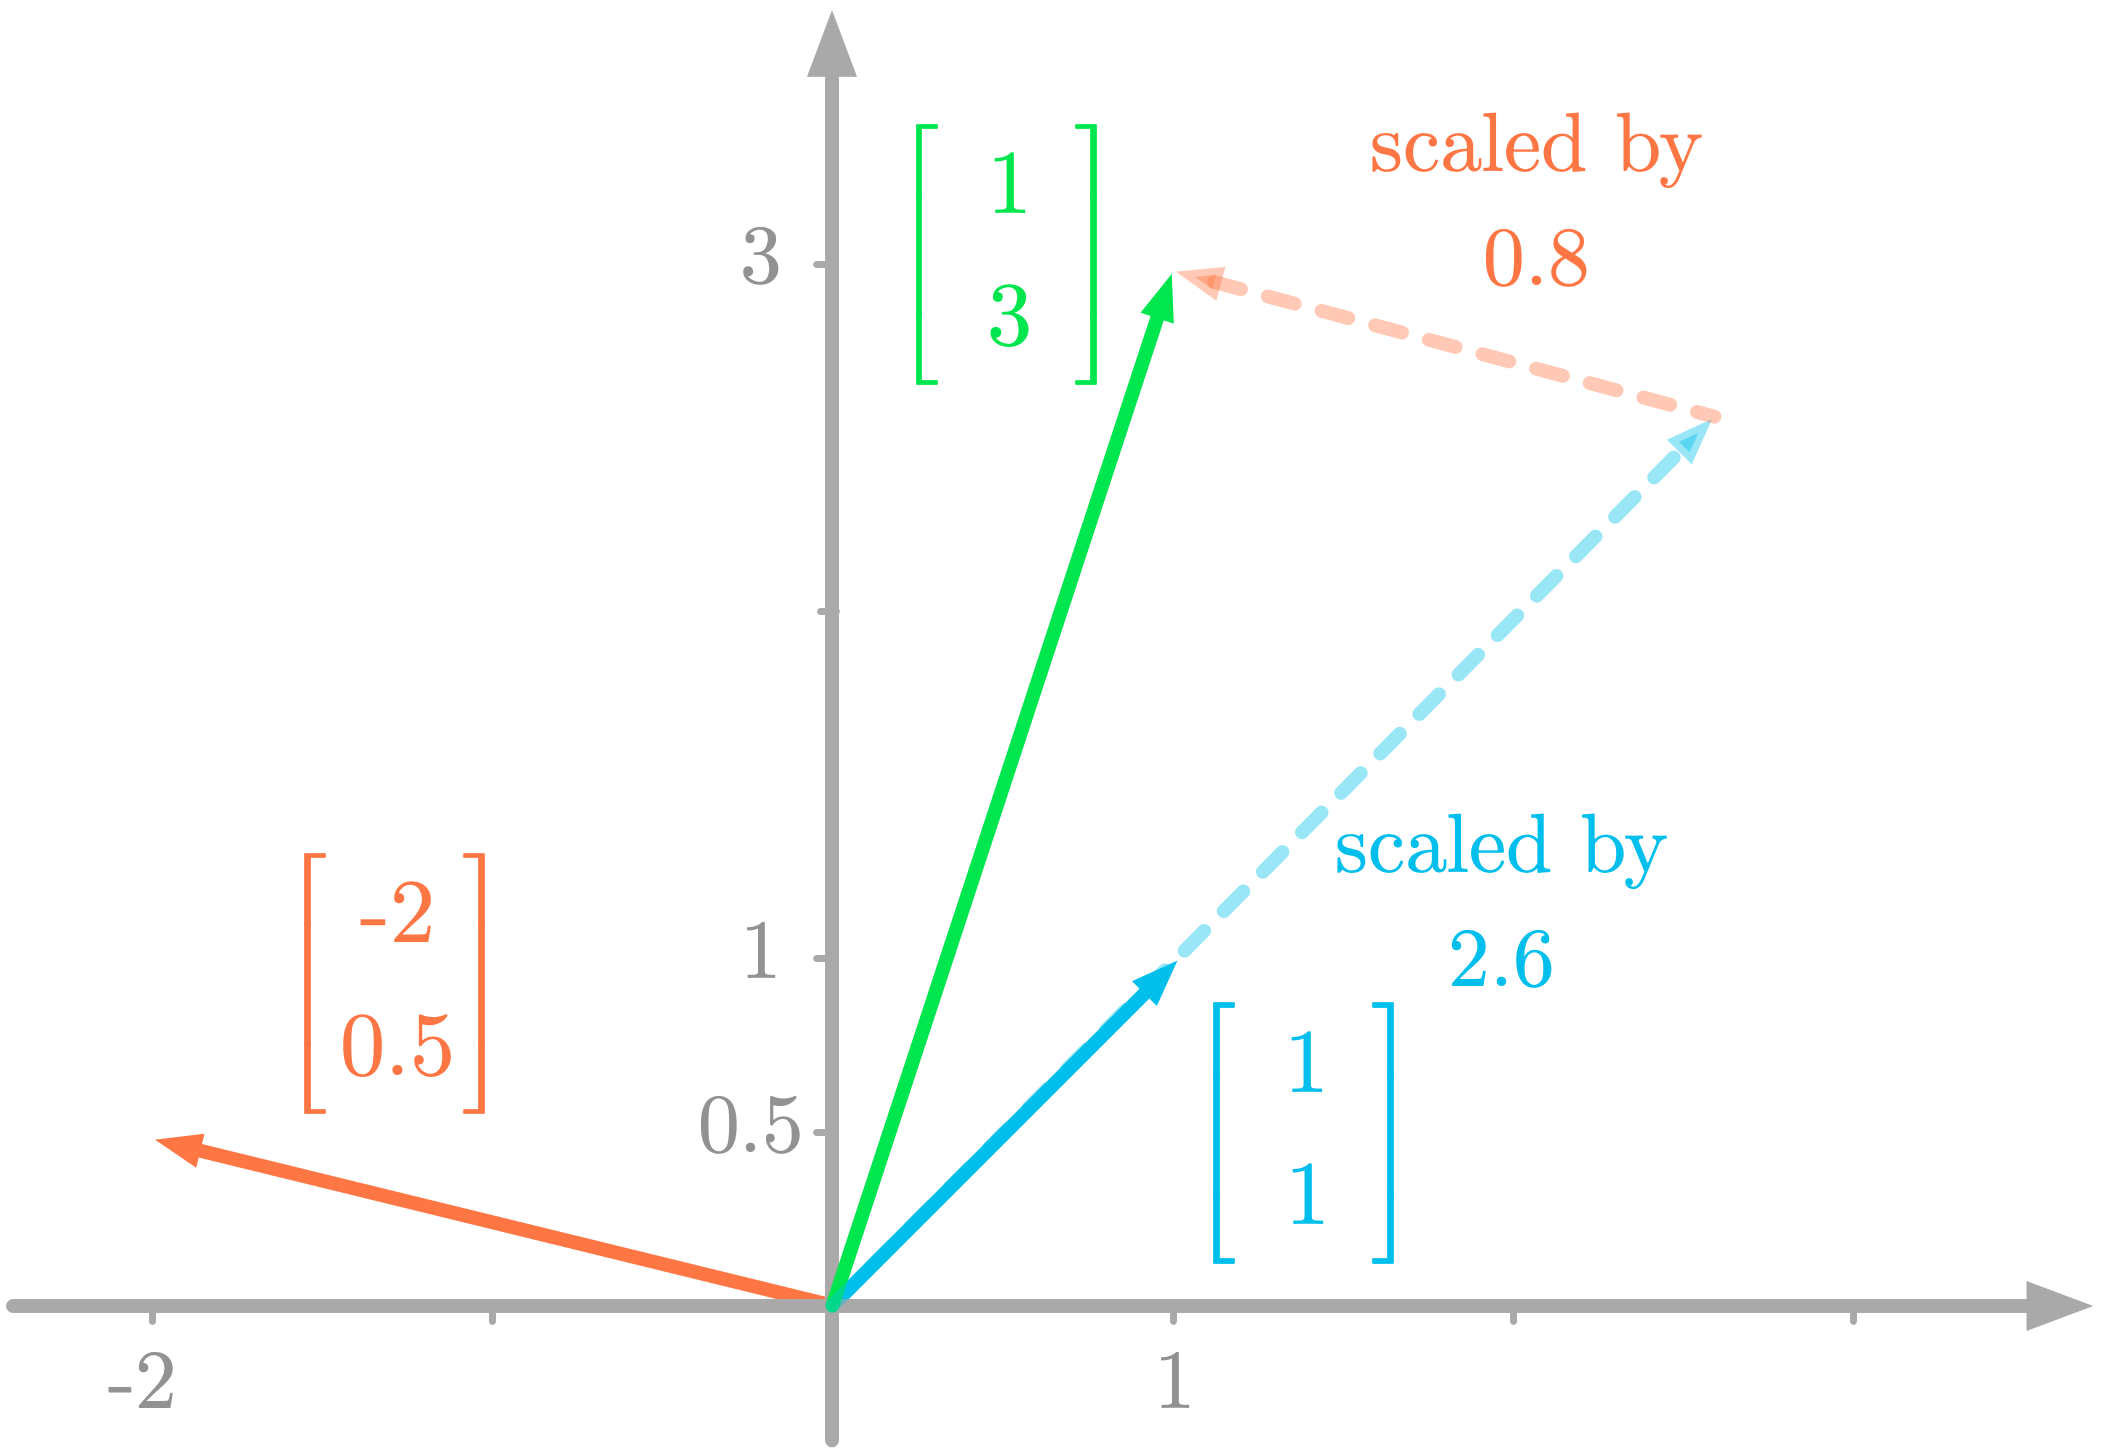 Figure 4: Linear combination of the vectors scaled by $x$ and $y$ gives the right-hand vector.